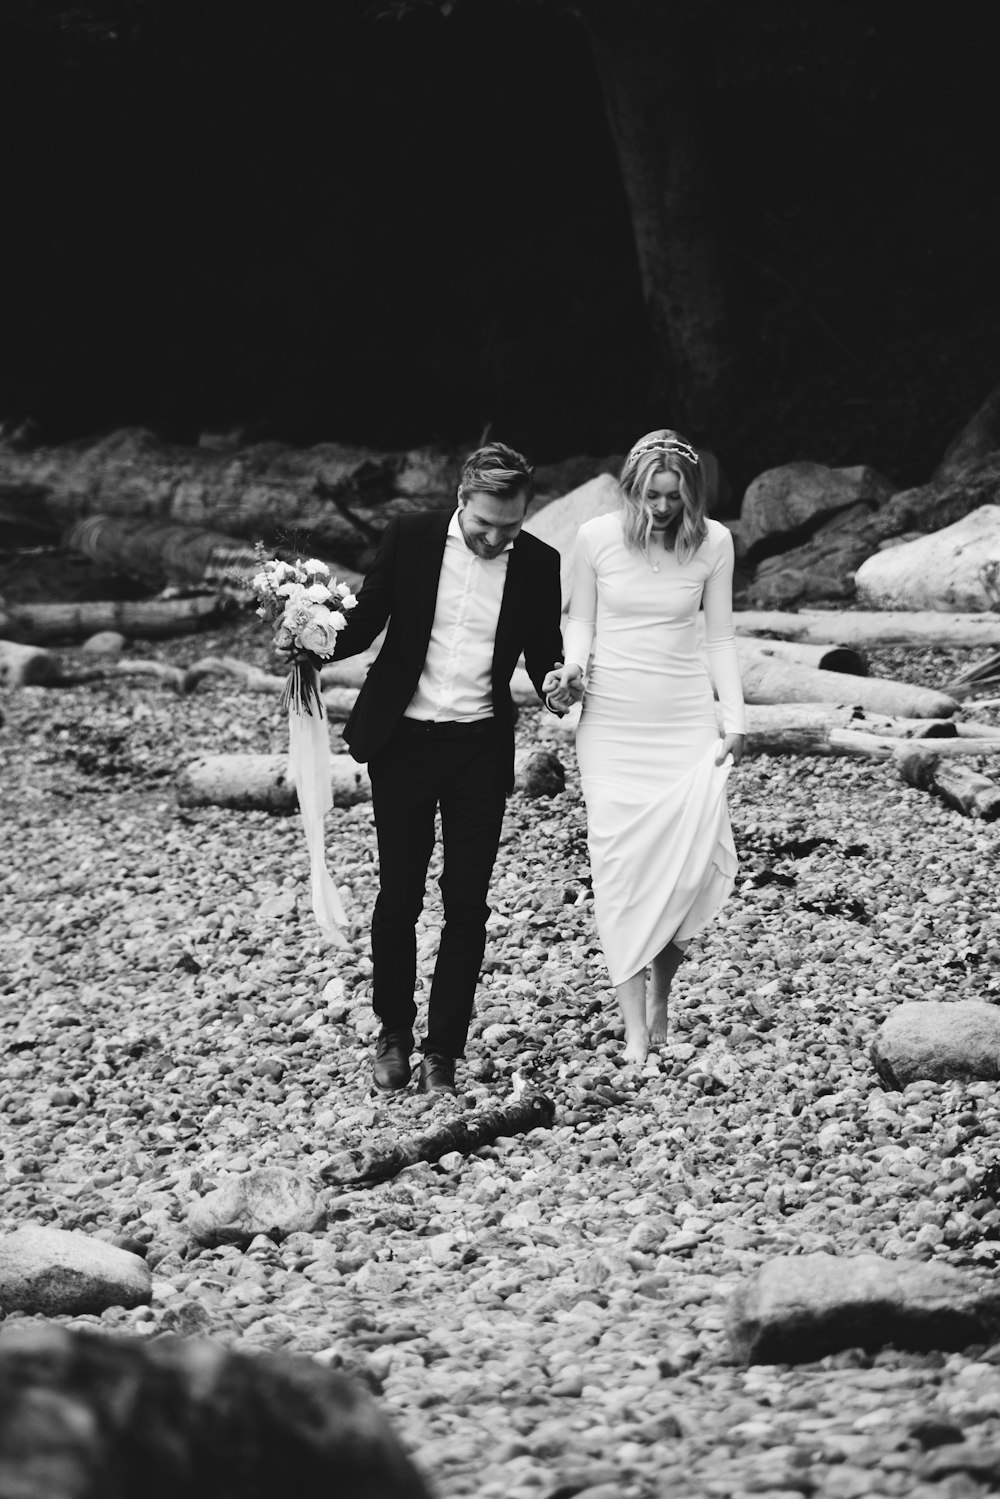 grayscale photo of bride and groom walking